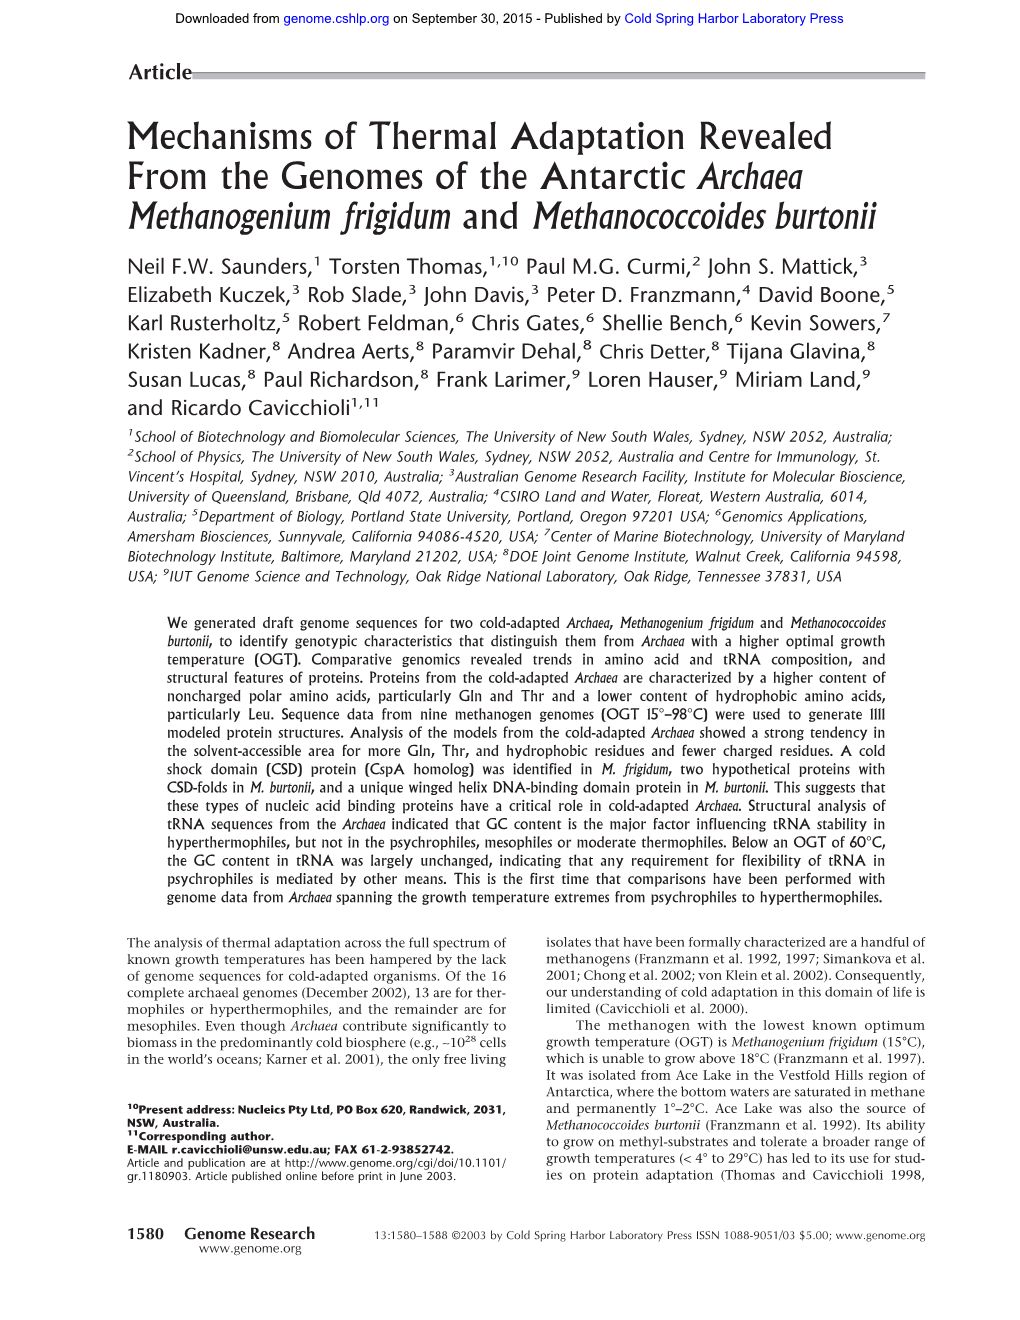 Mechanisms of Thermal Adaptation Revealed from the Genomes of the Antarctic Archaea Methanogenium Frigidum and Methanococcoides Burtonii Neil F.W